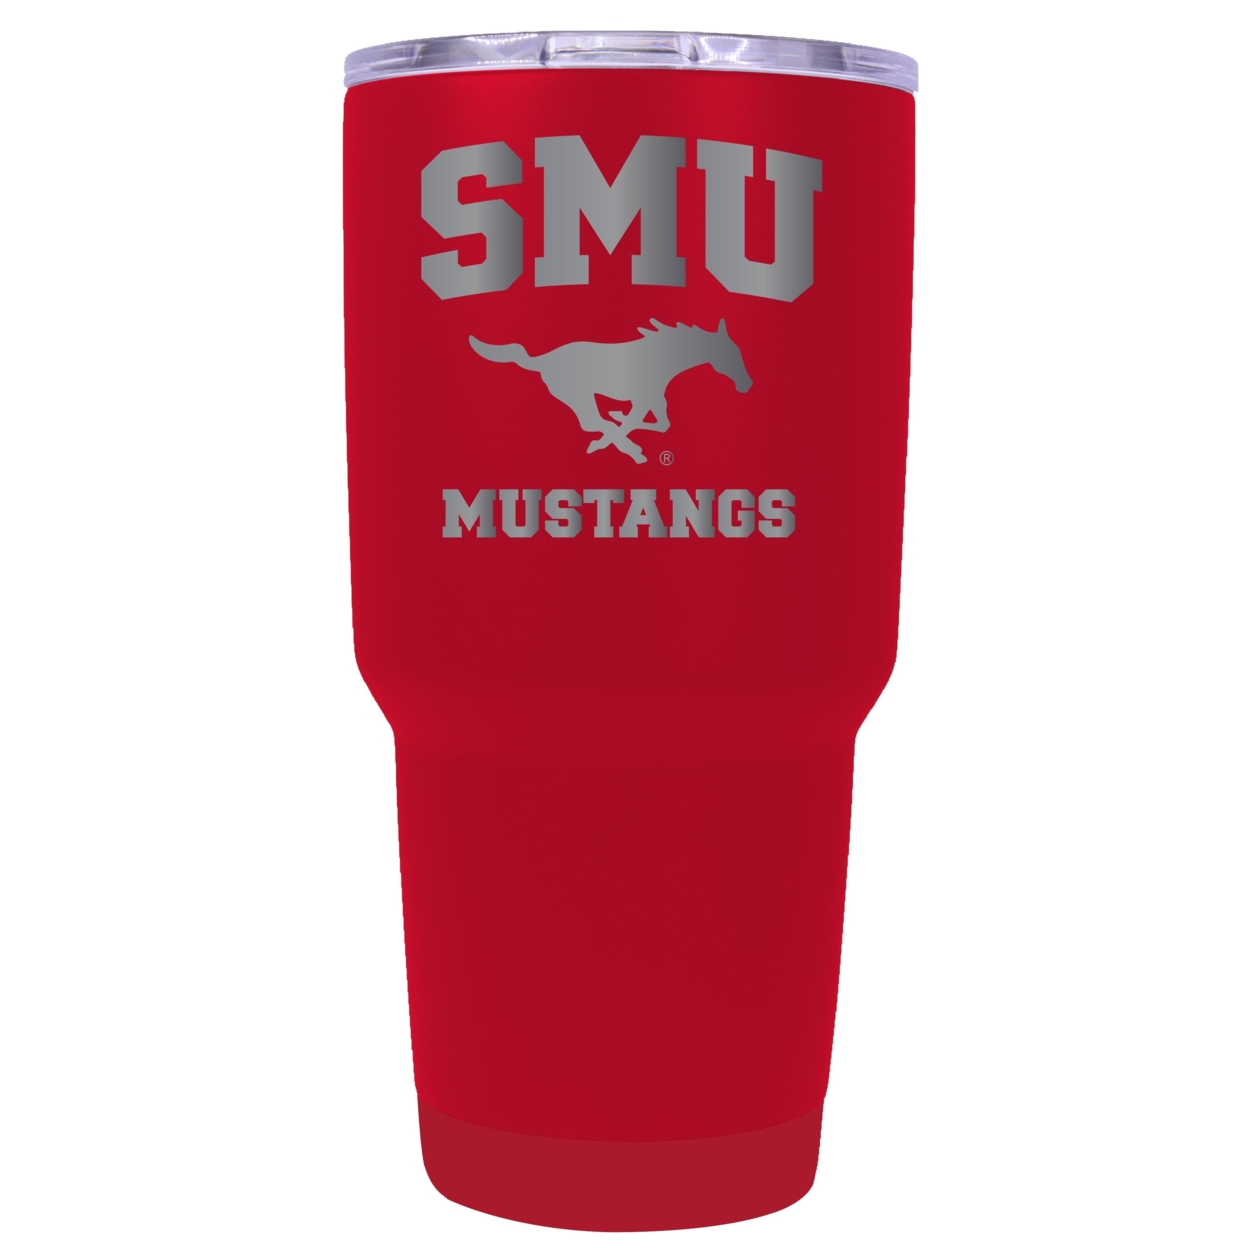 Southern Methodist University 24 Oz Laser Engraved Stainless Steel Insulated Tumbler - Choose Your Color. - Navy